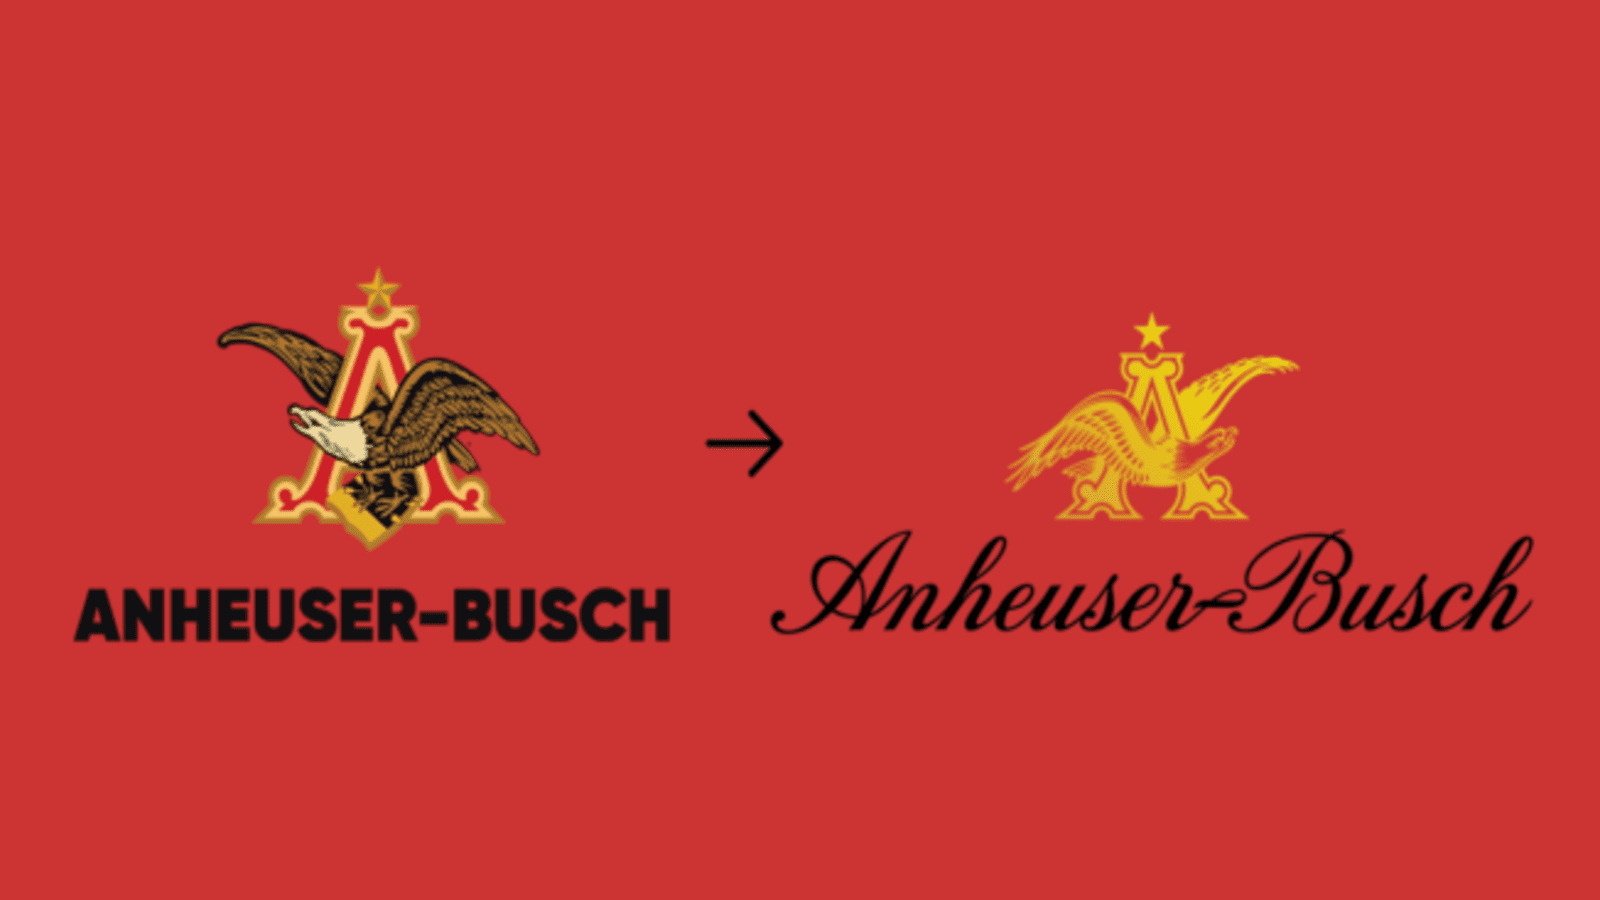 Anheuser-Busch ditches iconic logo for a new forward-looking alternative